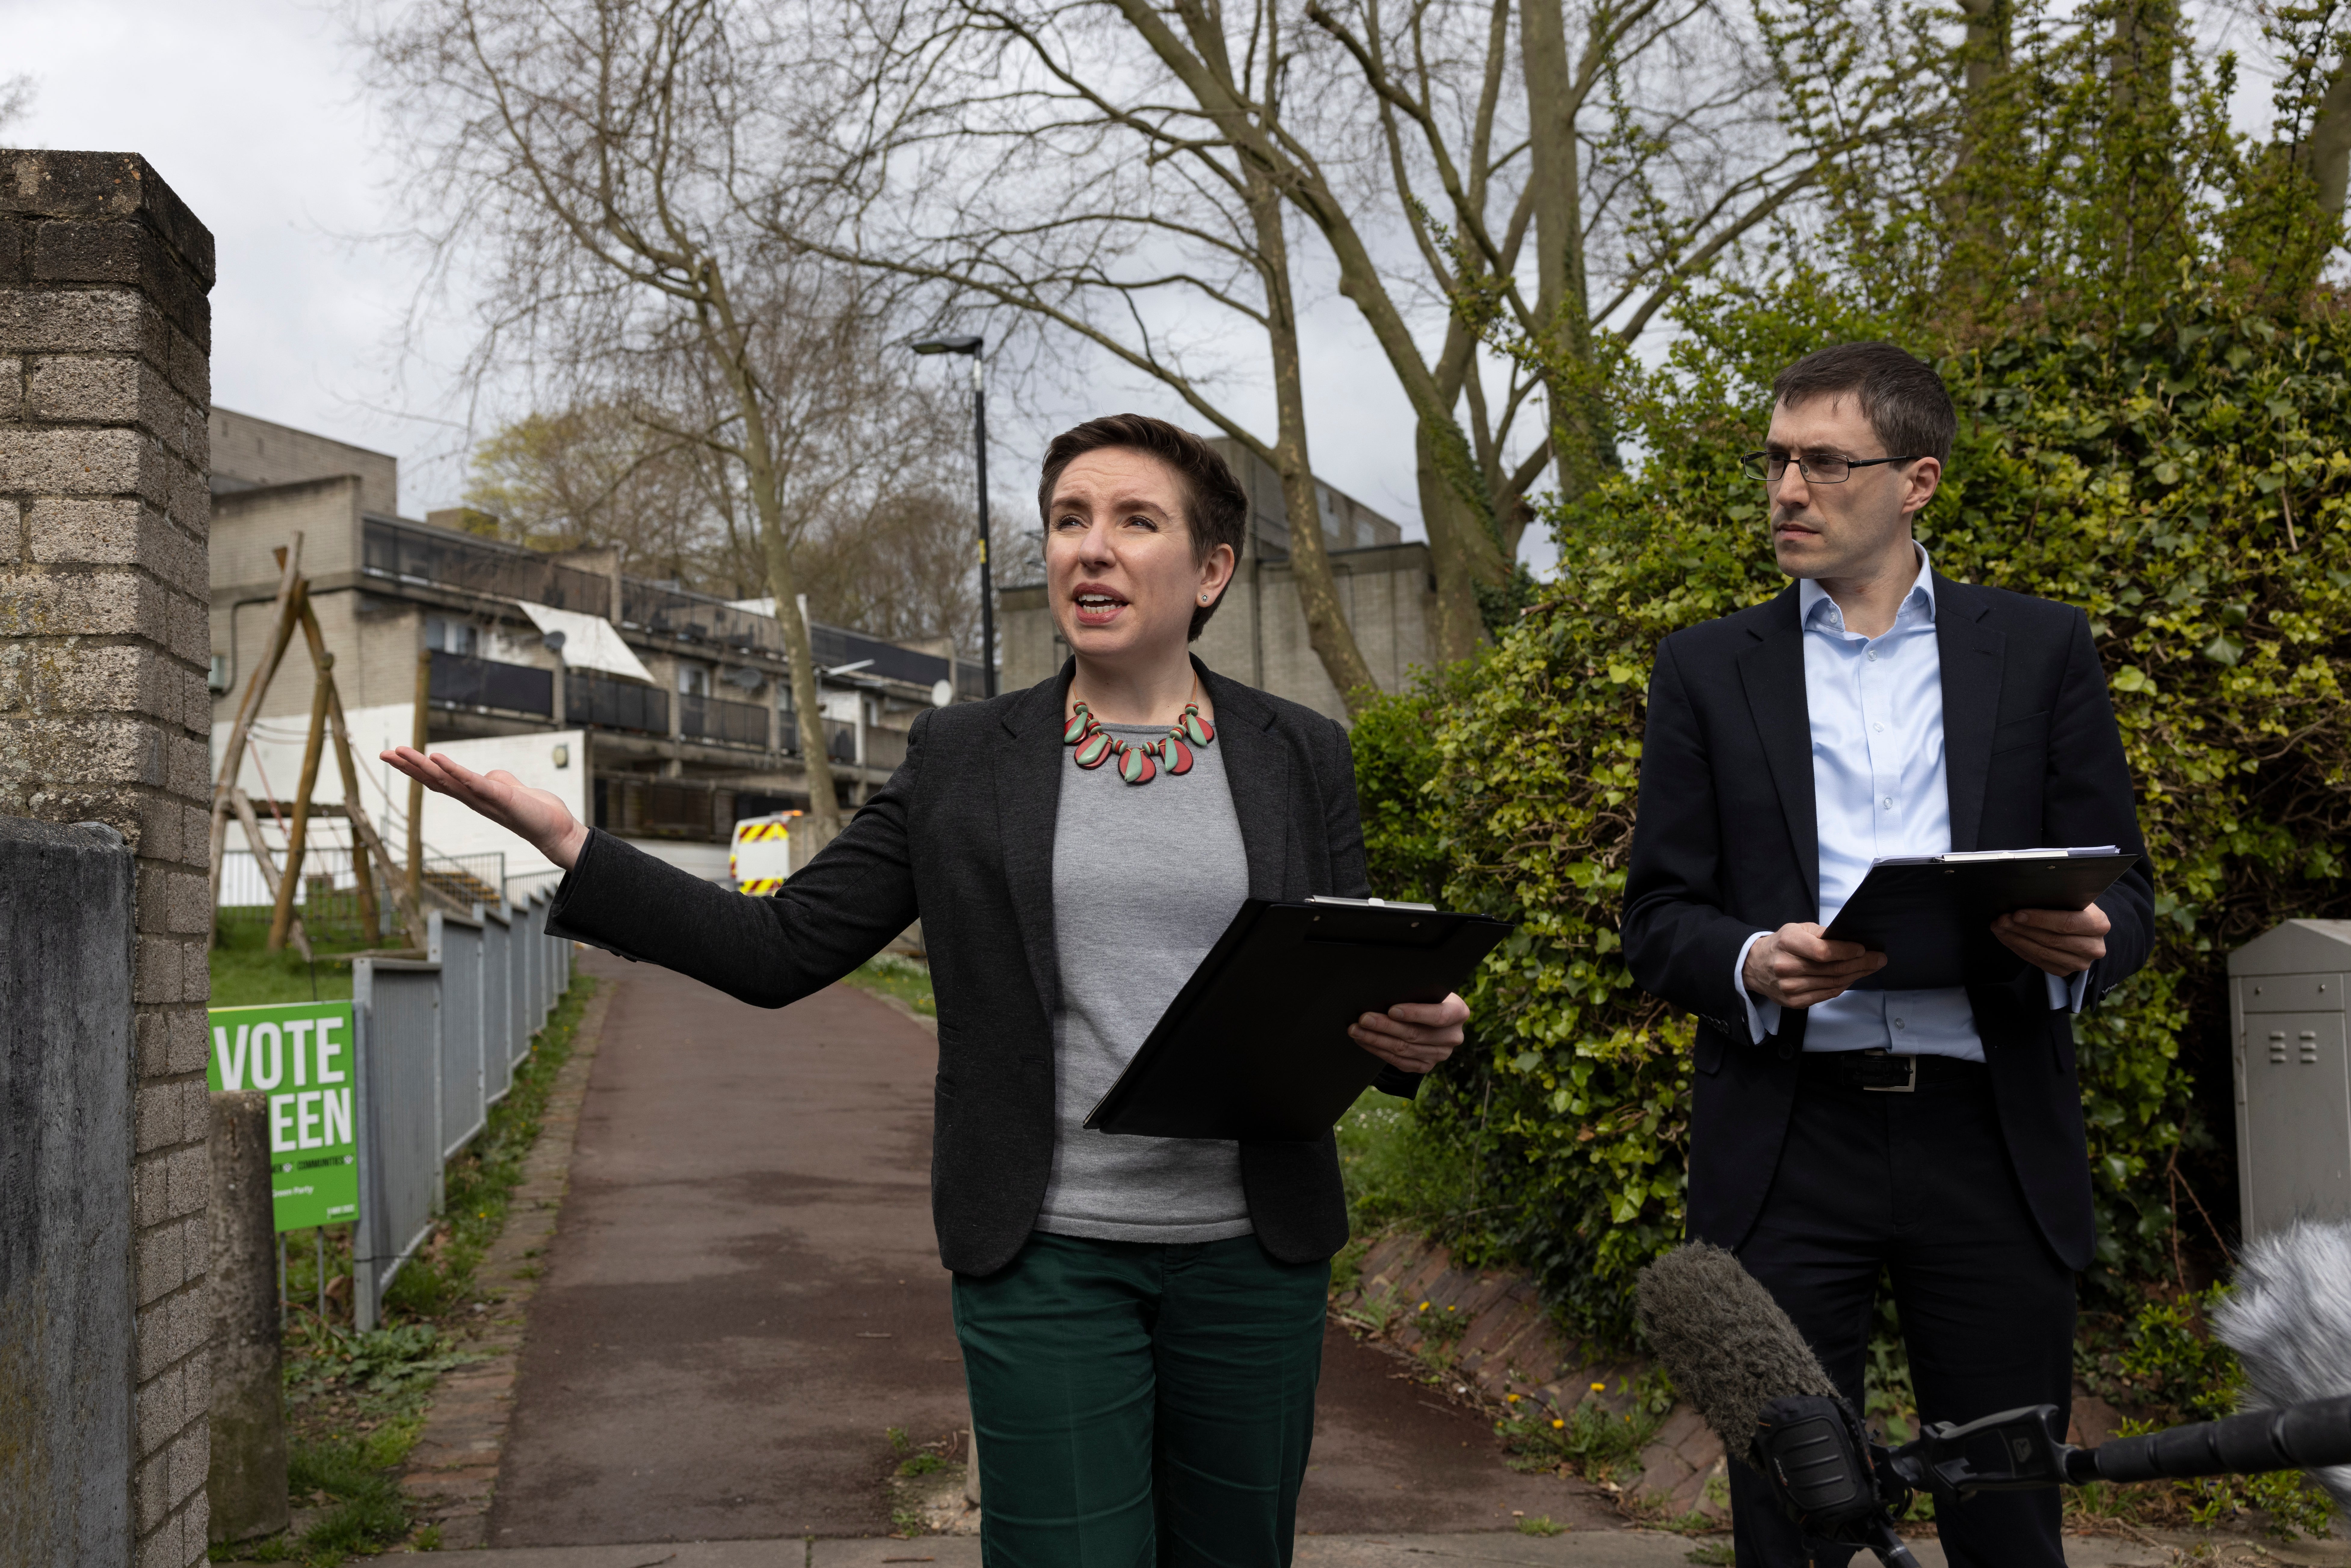 Joint Green Party leaders Adrian Ramsay and Carla Denyer launch their Local Election campaign in Lambeth on 5 April